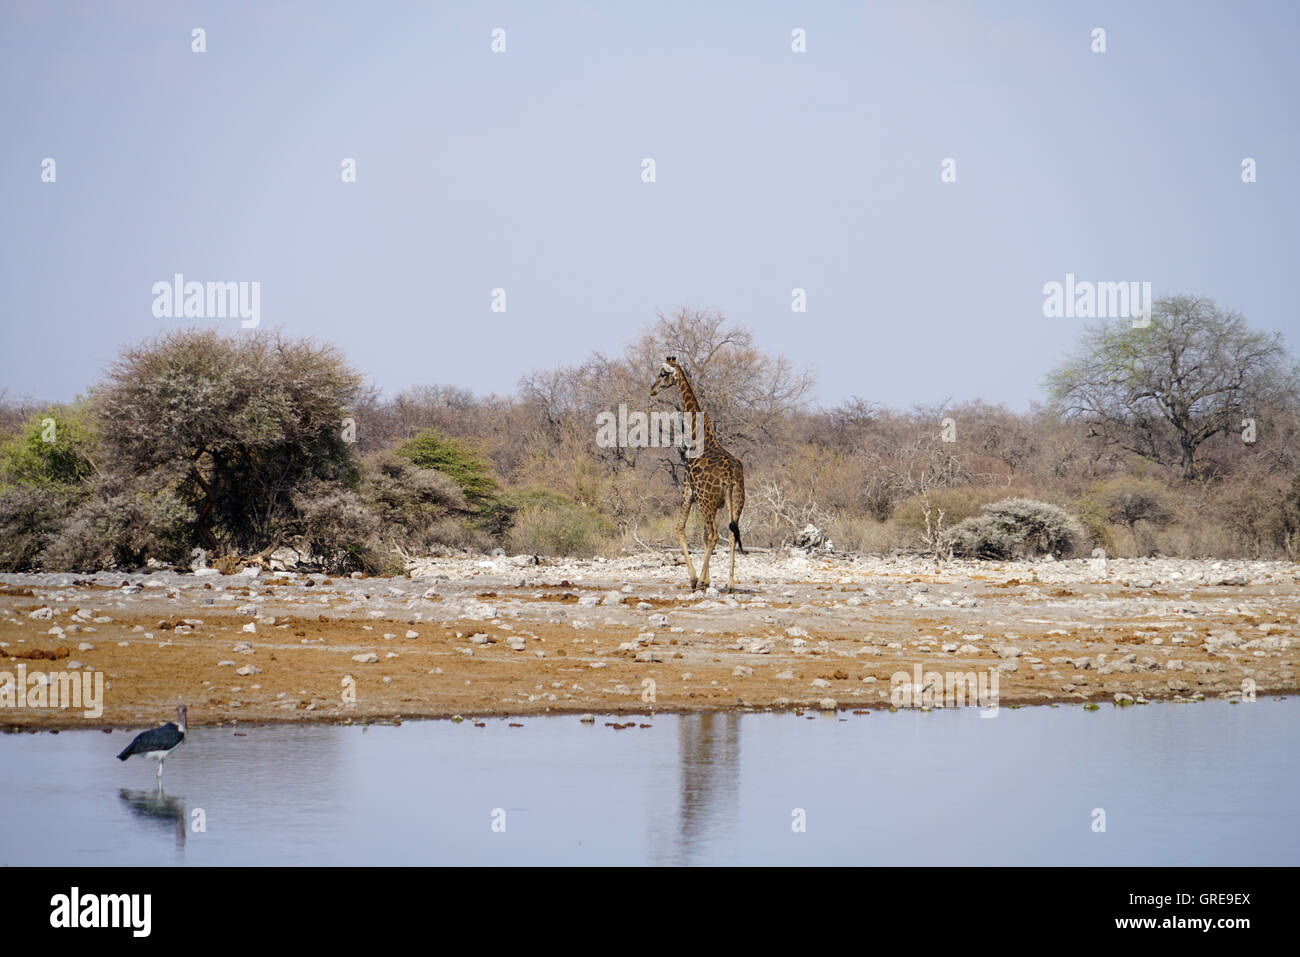 Giraffe And Marabou At A Water Hole Stock Photo